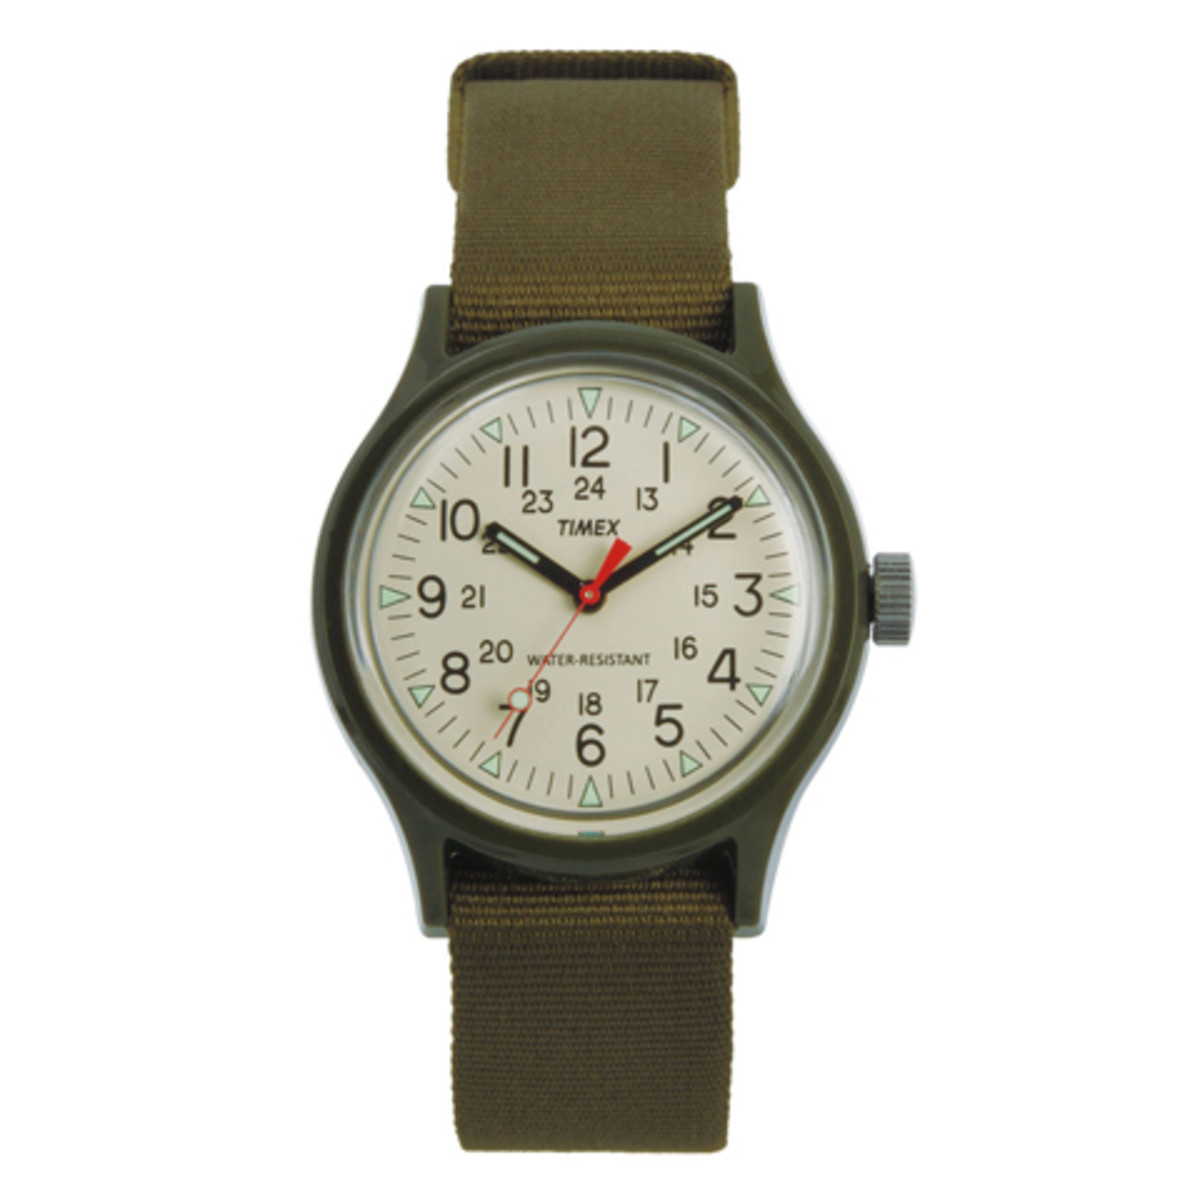 Timex Japan releases a special edition of the Original Camper in